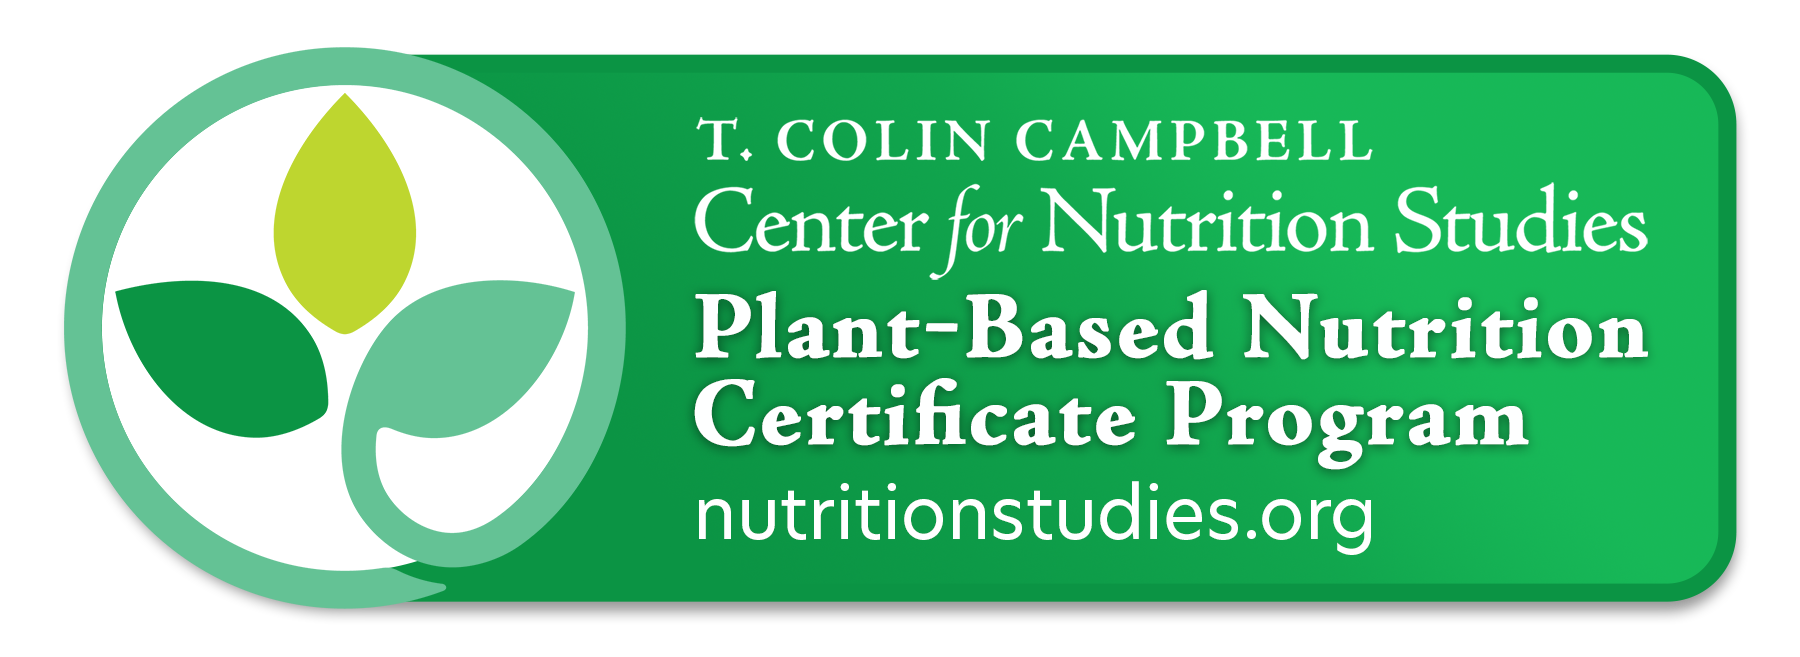 plant based certification, plant based nutrition certification, t colin campbell center for nutrition studies plant based certificate professional, certified plant based professional, nutrition studies certified plant based professional, plant based nutrition professional